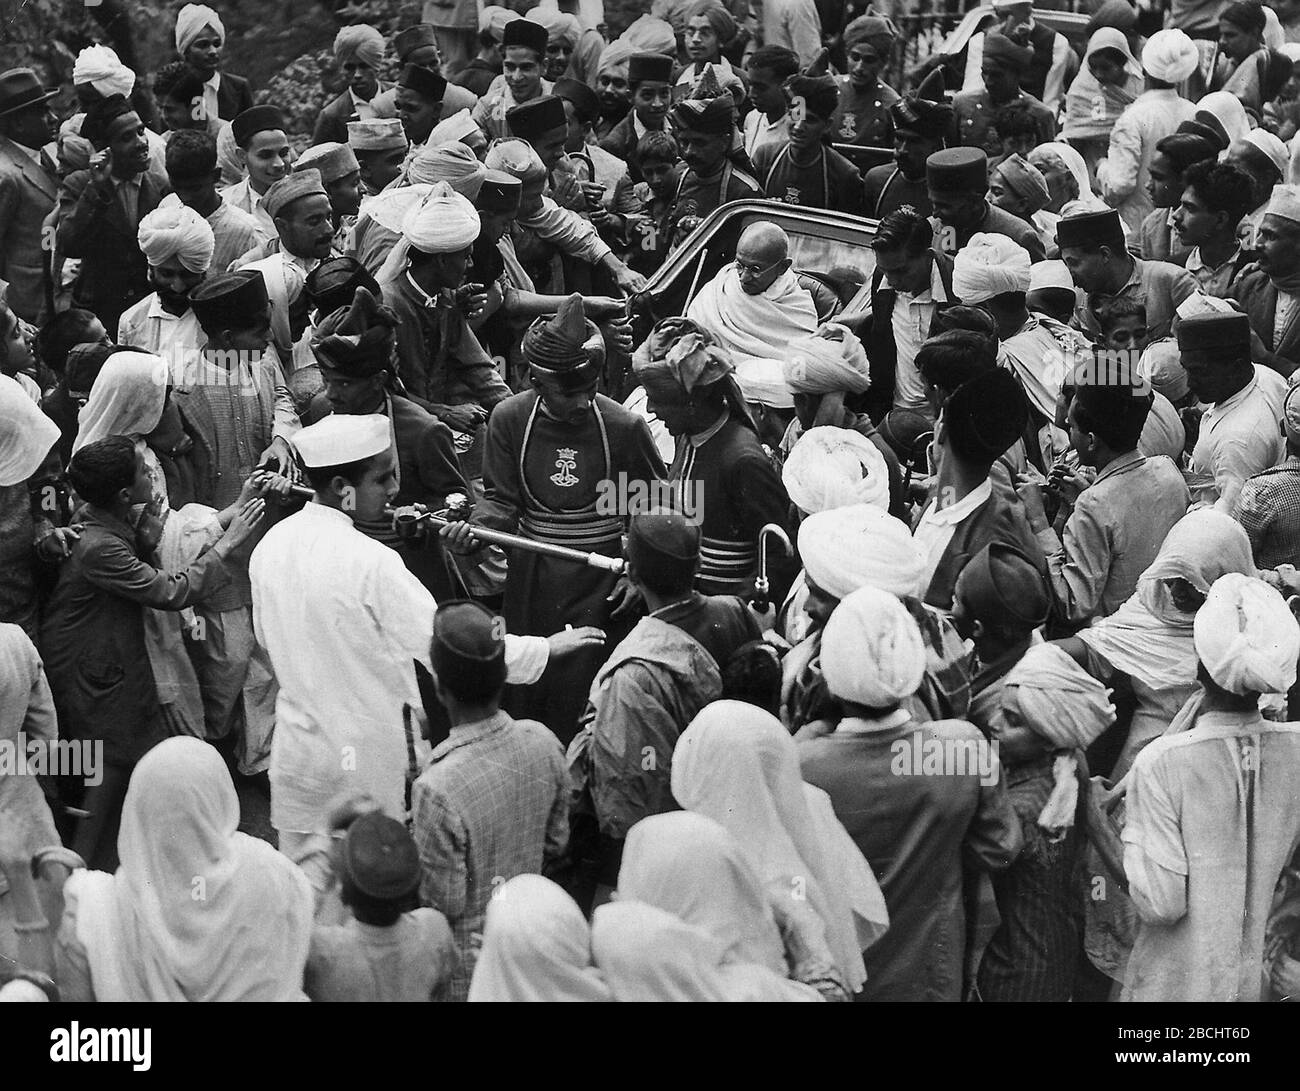 English: Mahatma on his way by rickshaw to the Viceregal Lodge to meet the Viceroy of India.; 27 August 1940; https://www.ara.cat/politica/dindependencies-Proxim-Orient-Gandhi-Vietnam 0 1433856686.html; Unknown (see [1] Stock Photo - Alamy